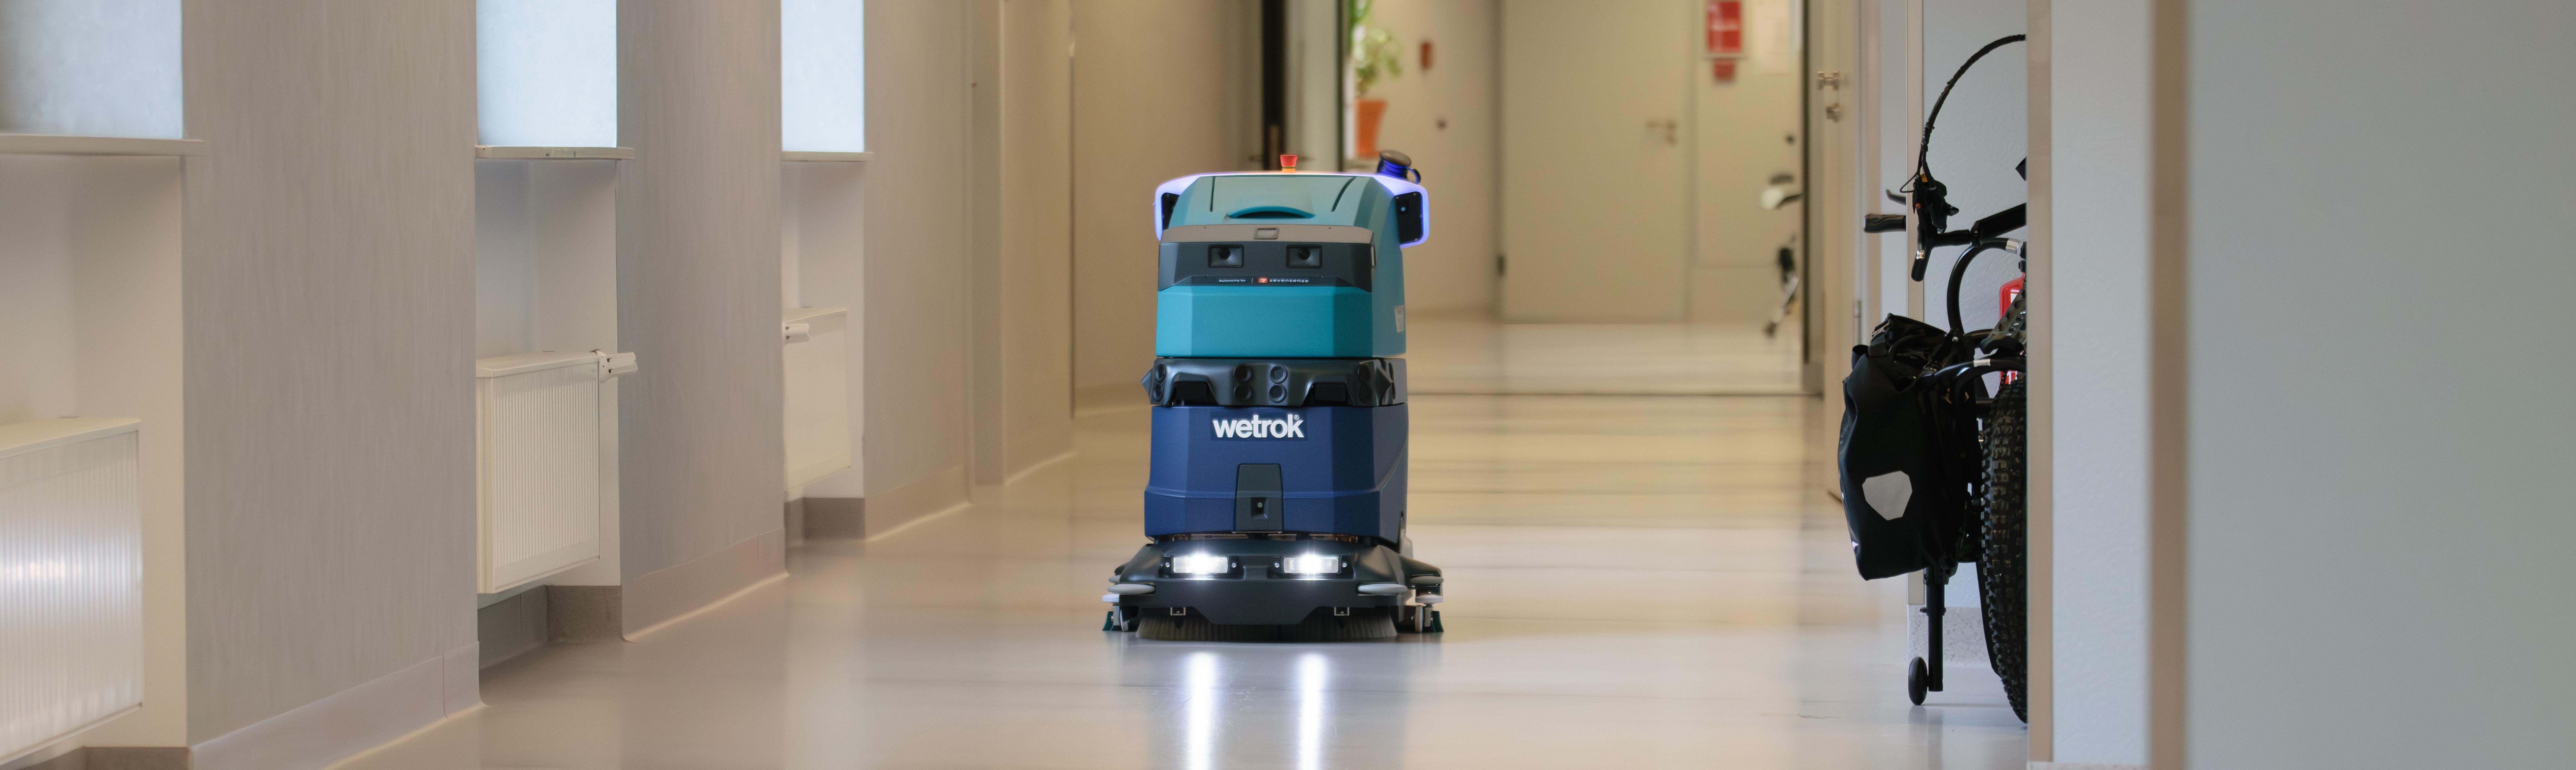 Healthy, thanks to cleaning robot